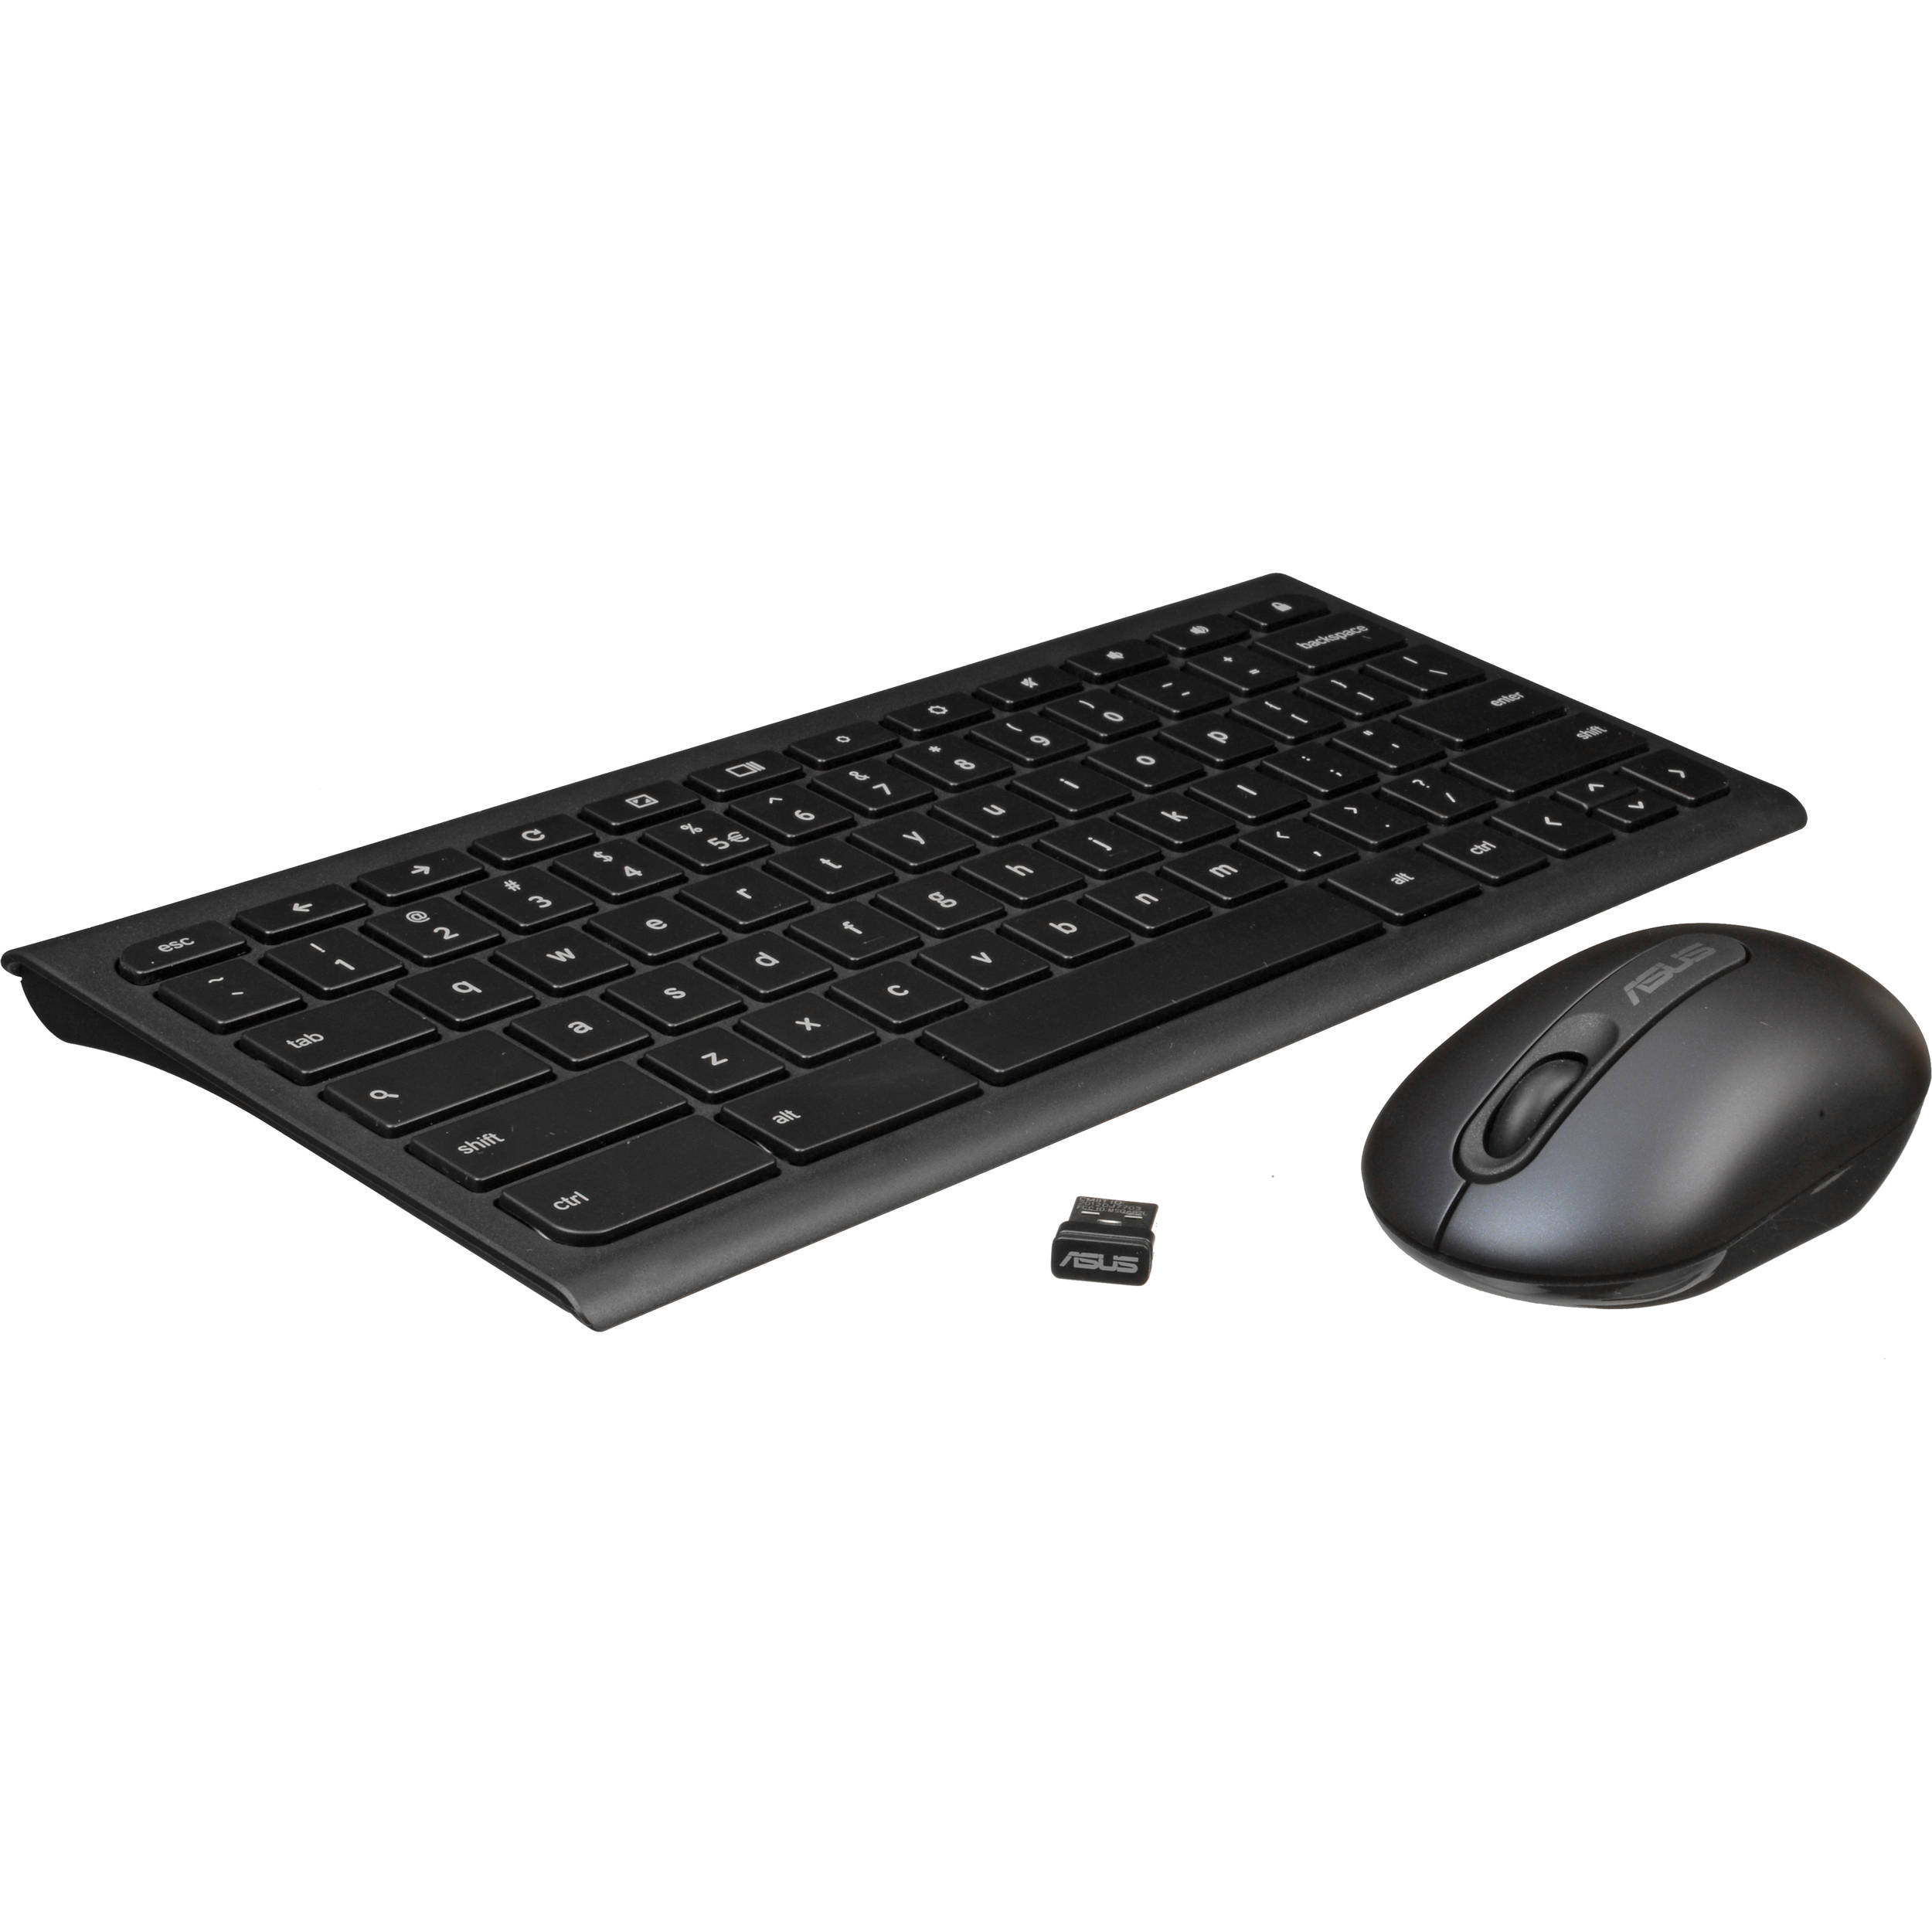 Asus Chromebox Wireless Kbm Keyboard And Mouse 90ms0000 P